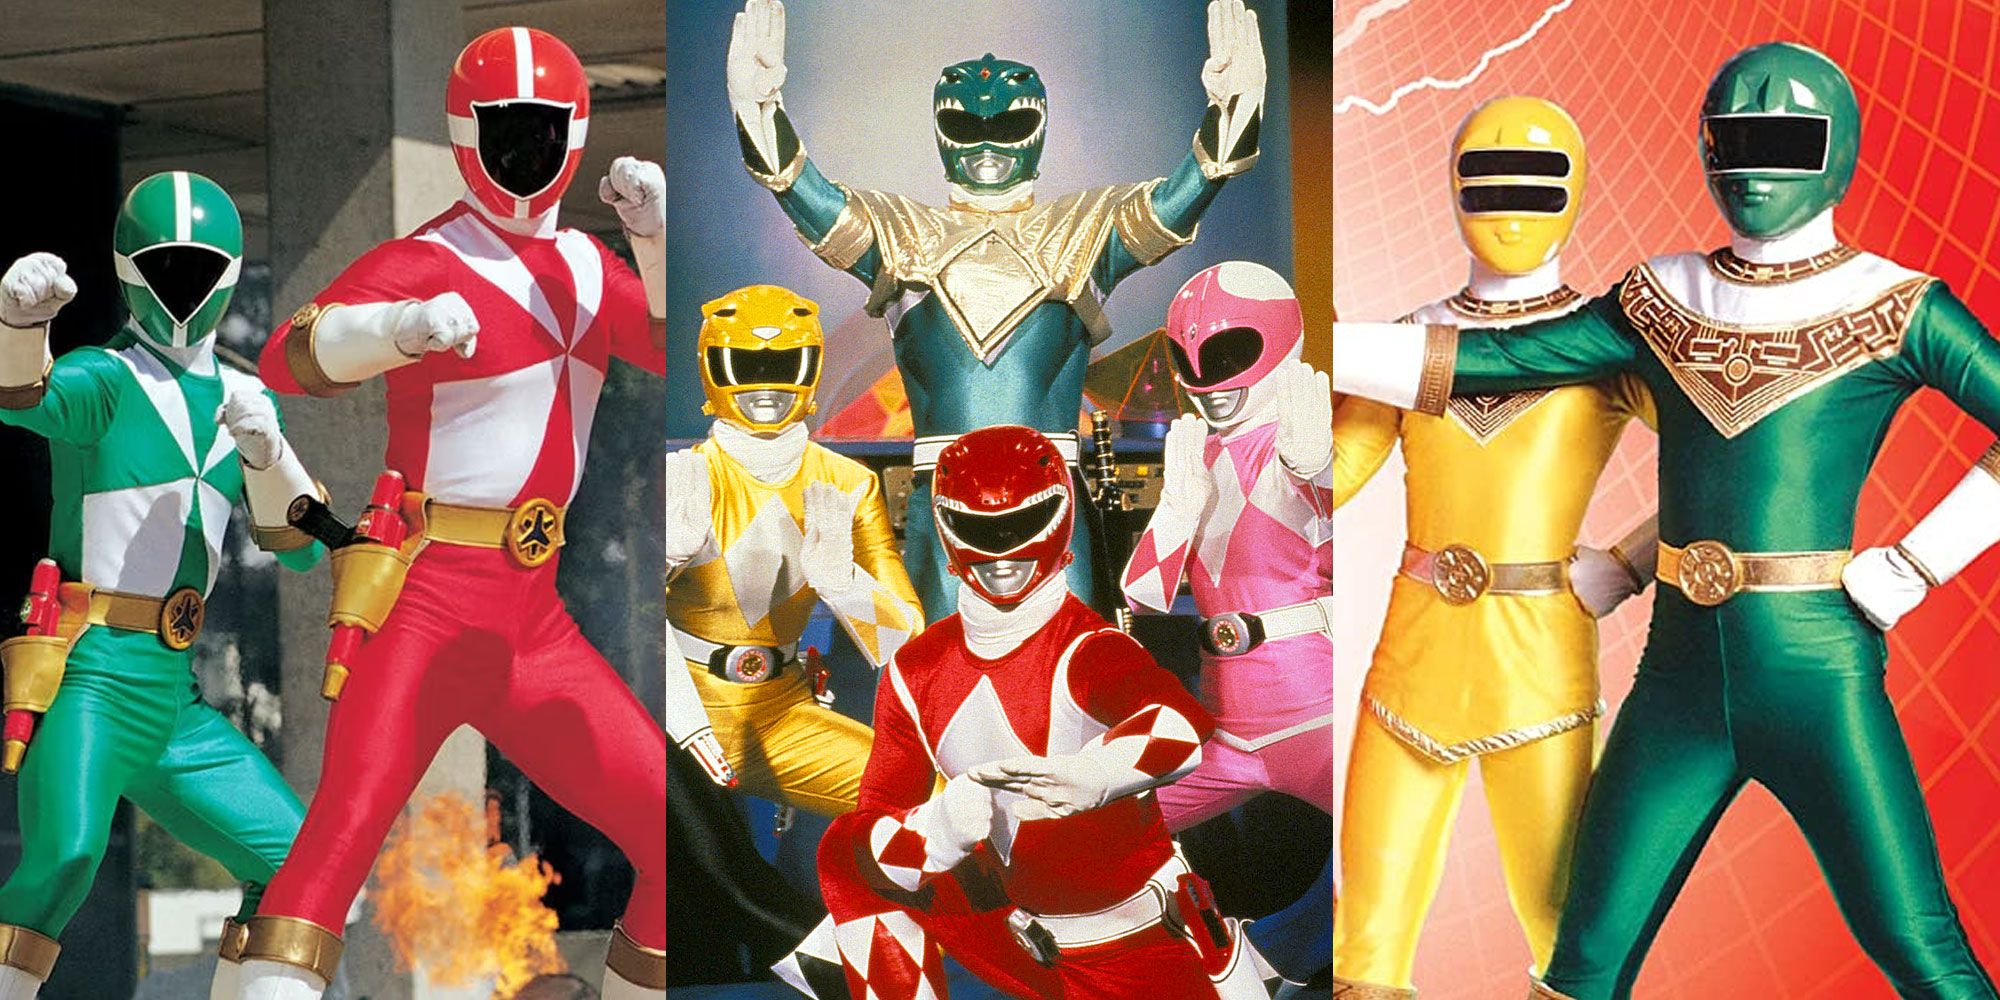 A split image features the Power Rangers Lightspeed Rescue, Mighty Morphin, and Zeo teams